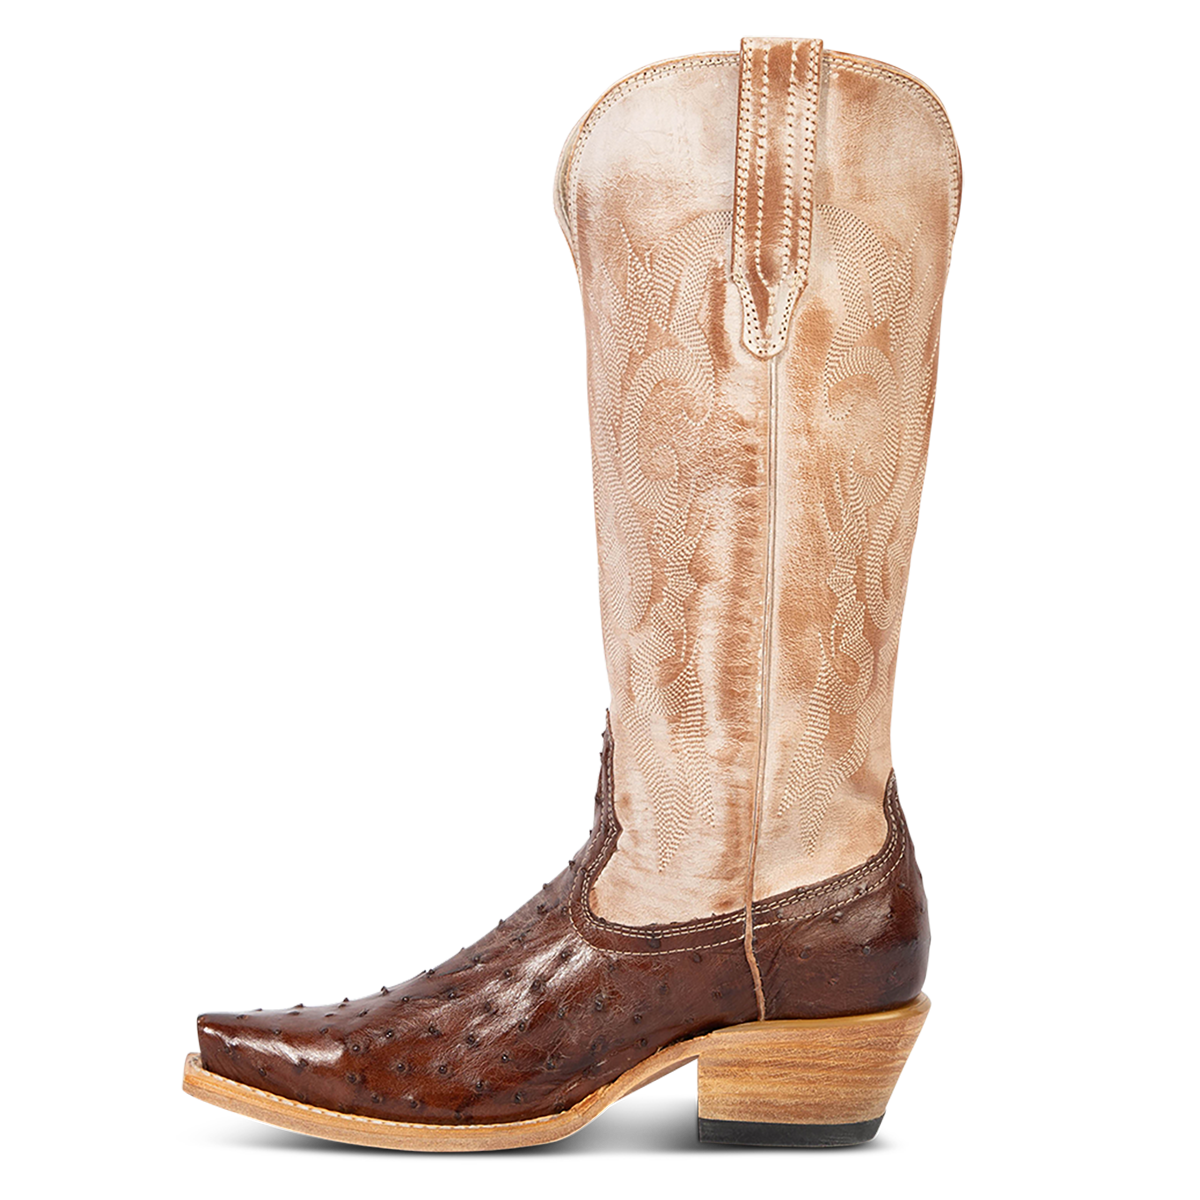 Side view showing leather pull straps and western stitch detailing on FREEBIRD women's Woodland brown ostrich leather boot